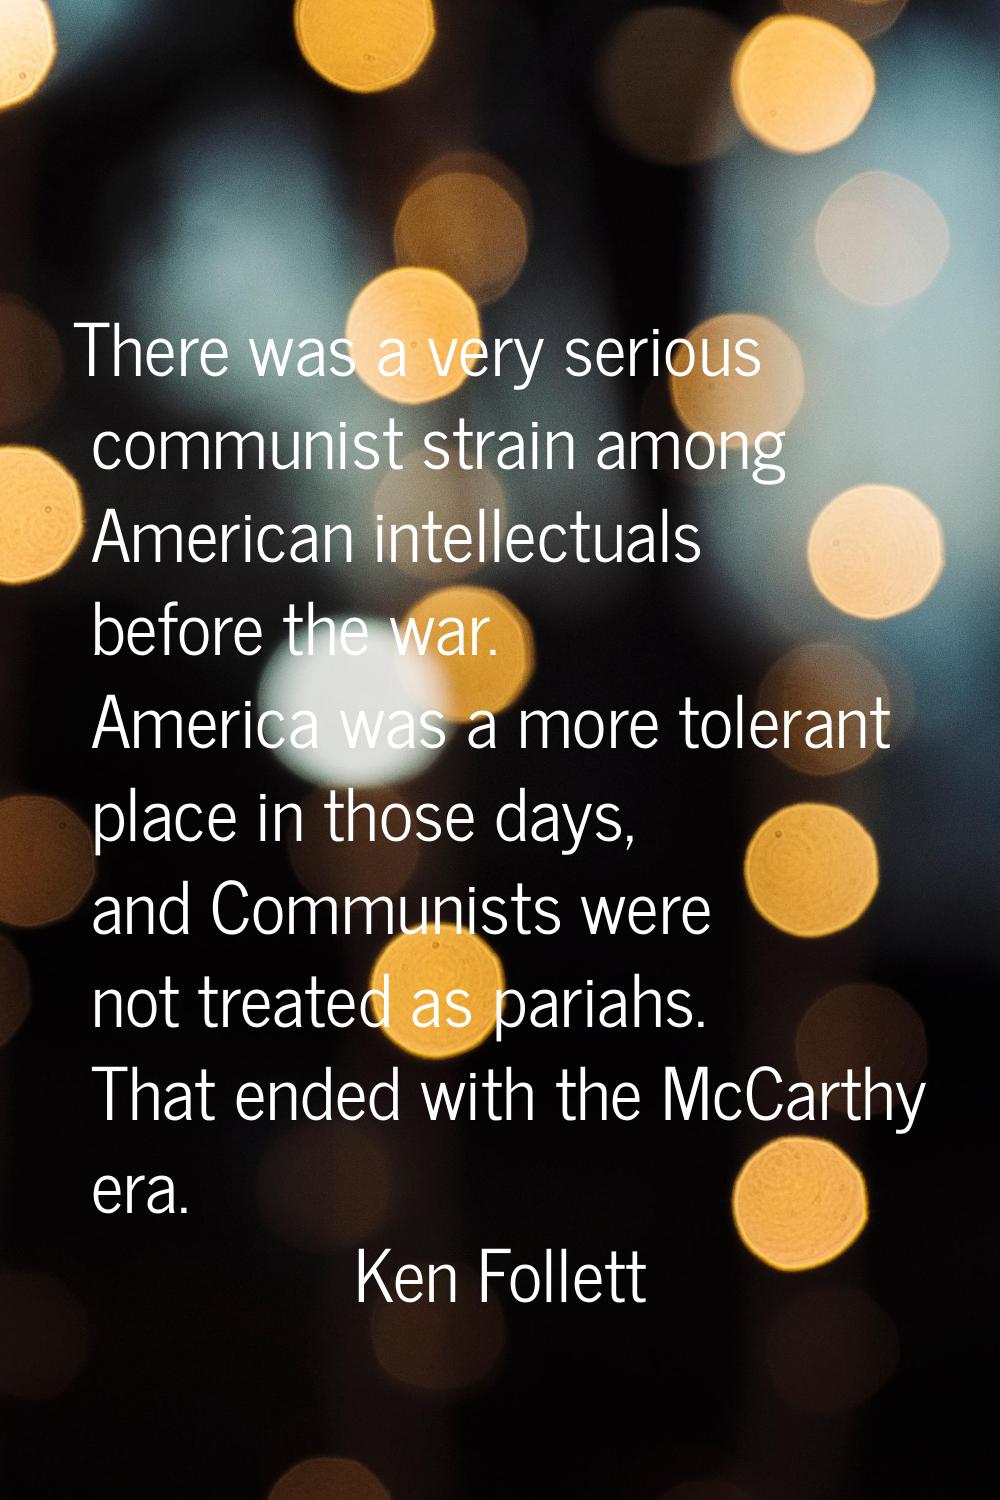 There was a very serious communist strain among American intellectuals before the war. America was 